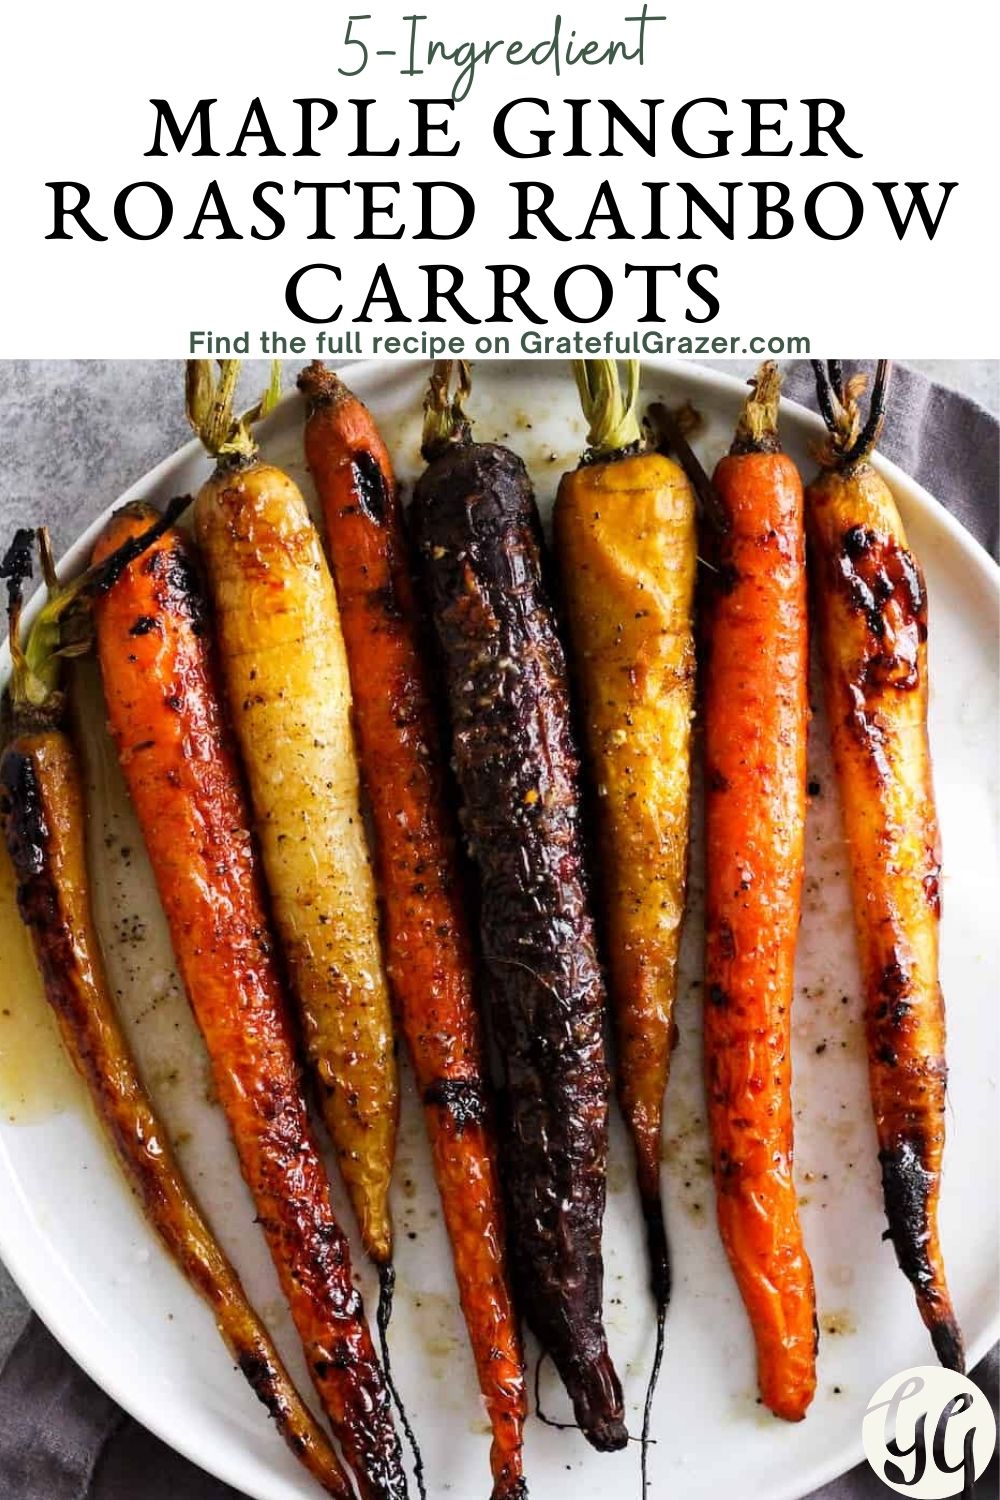 Roasted rainbow carrots on a white plate with text reading, "5-Ingredient Maple Ginger Roasted Rainbow Carrots. Find the full recipe on GratefulGrazer.com"